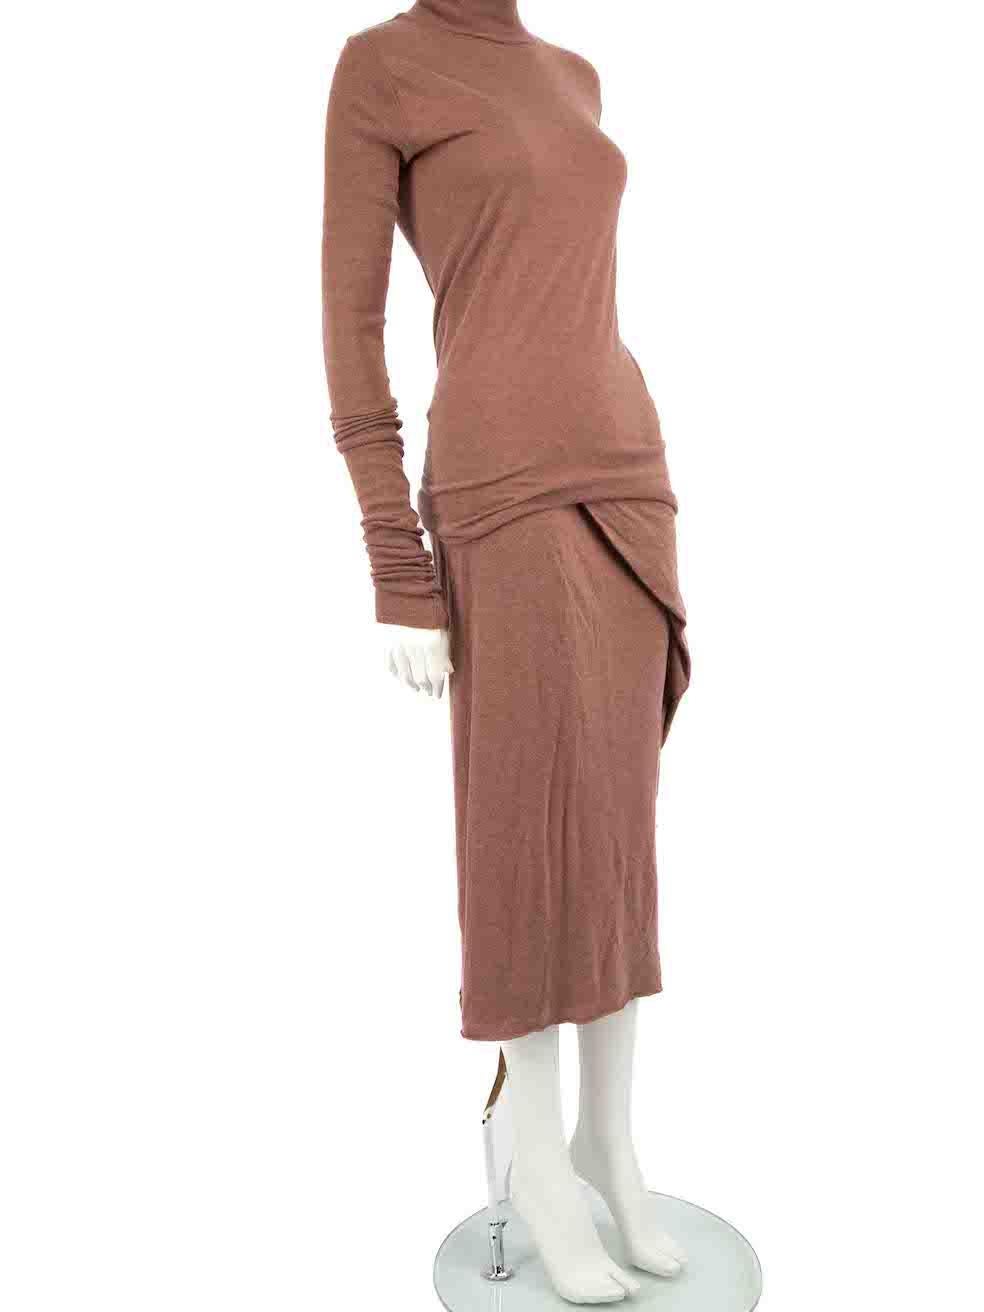 CONDITION is Very good. Minimal wear to set is evident. There is a light pilling through the front of the skirt on this used Rick Owens Lilies designer resale item.
 
 
 
 Details
 
 
 Brown
 
 Synthetic
 
 Matching set
 
 Stretchy
 
 Long sleeves